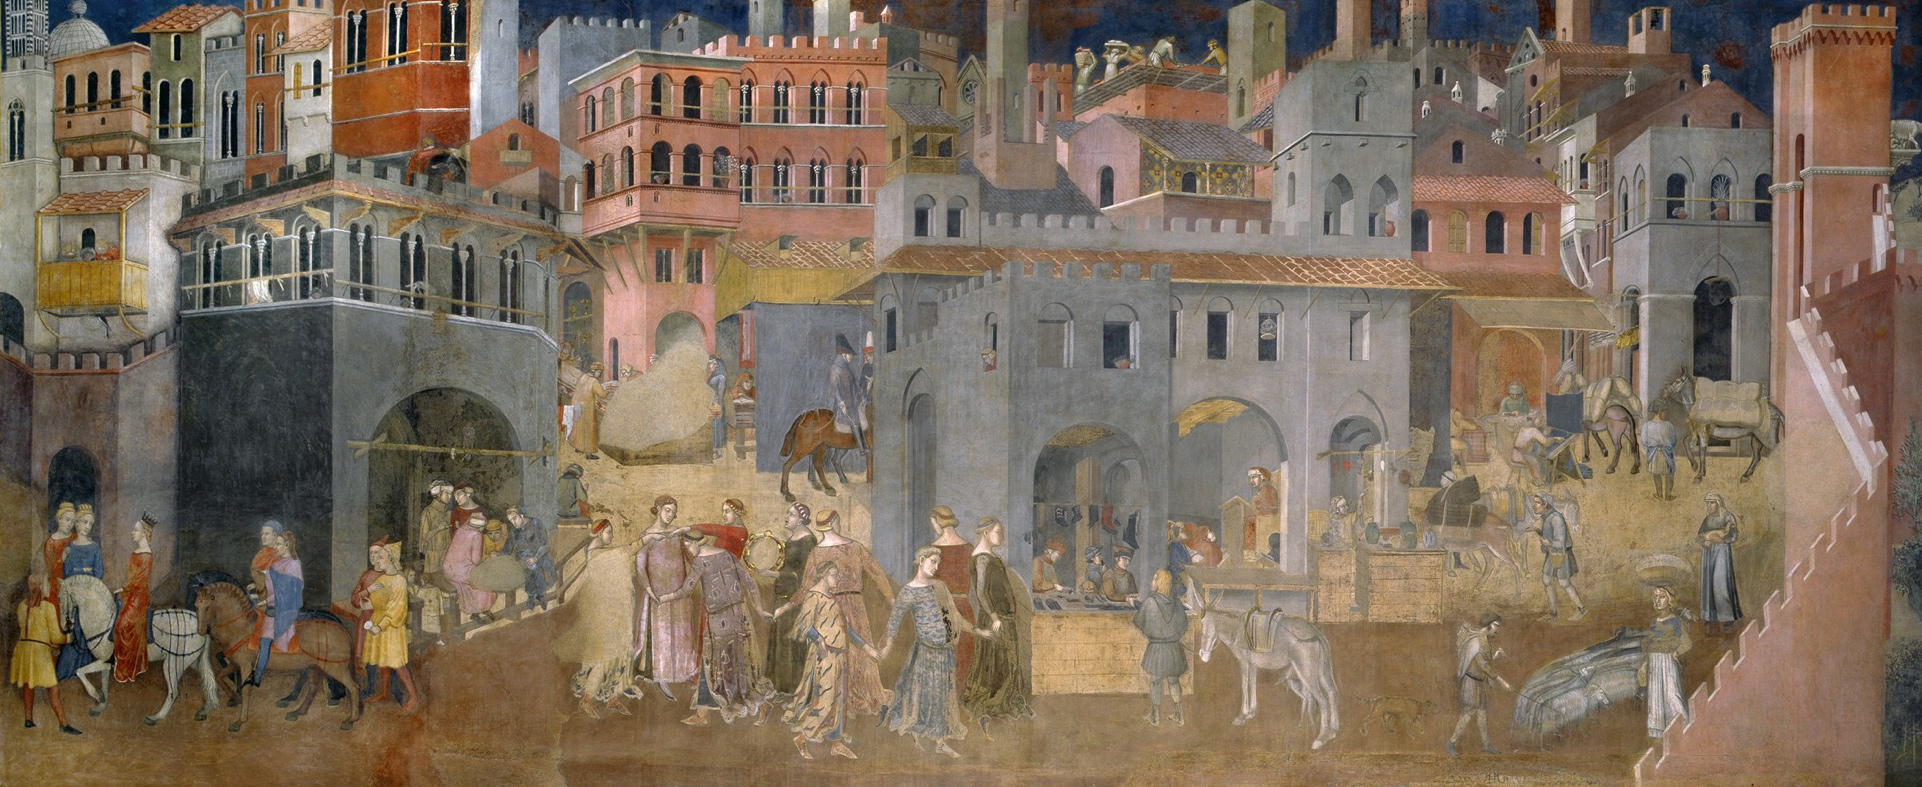 "Effects of Good Government," fresco by Ambrogio Lorenzetti. 1338 - 1339.